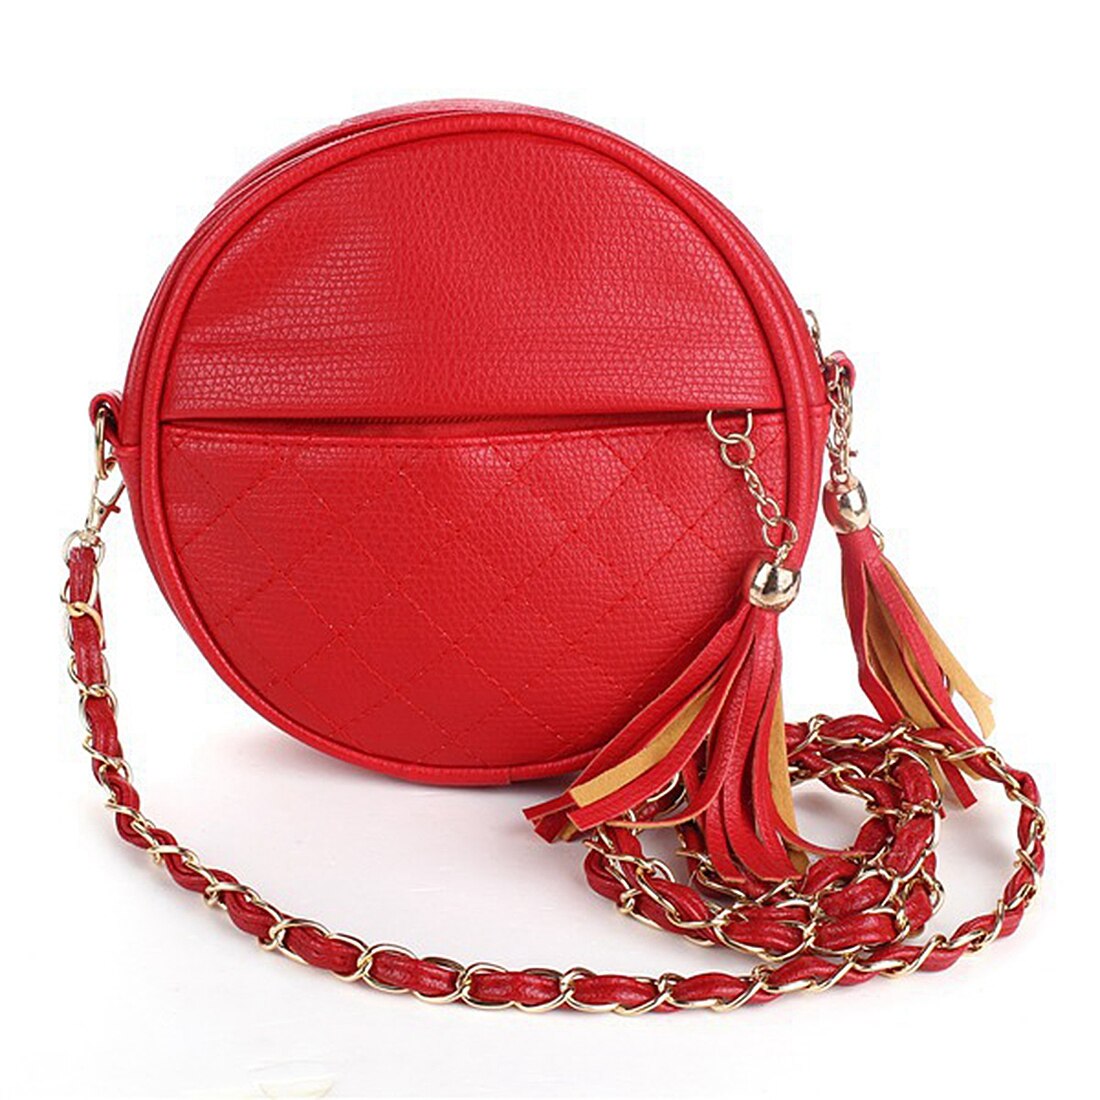 New tassel chain small women bags girls messenger bag leather crossbody bags candy colors lady handbags - ebowsos